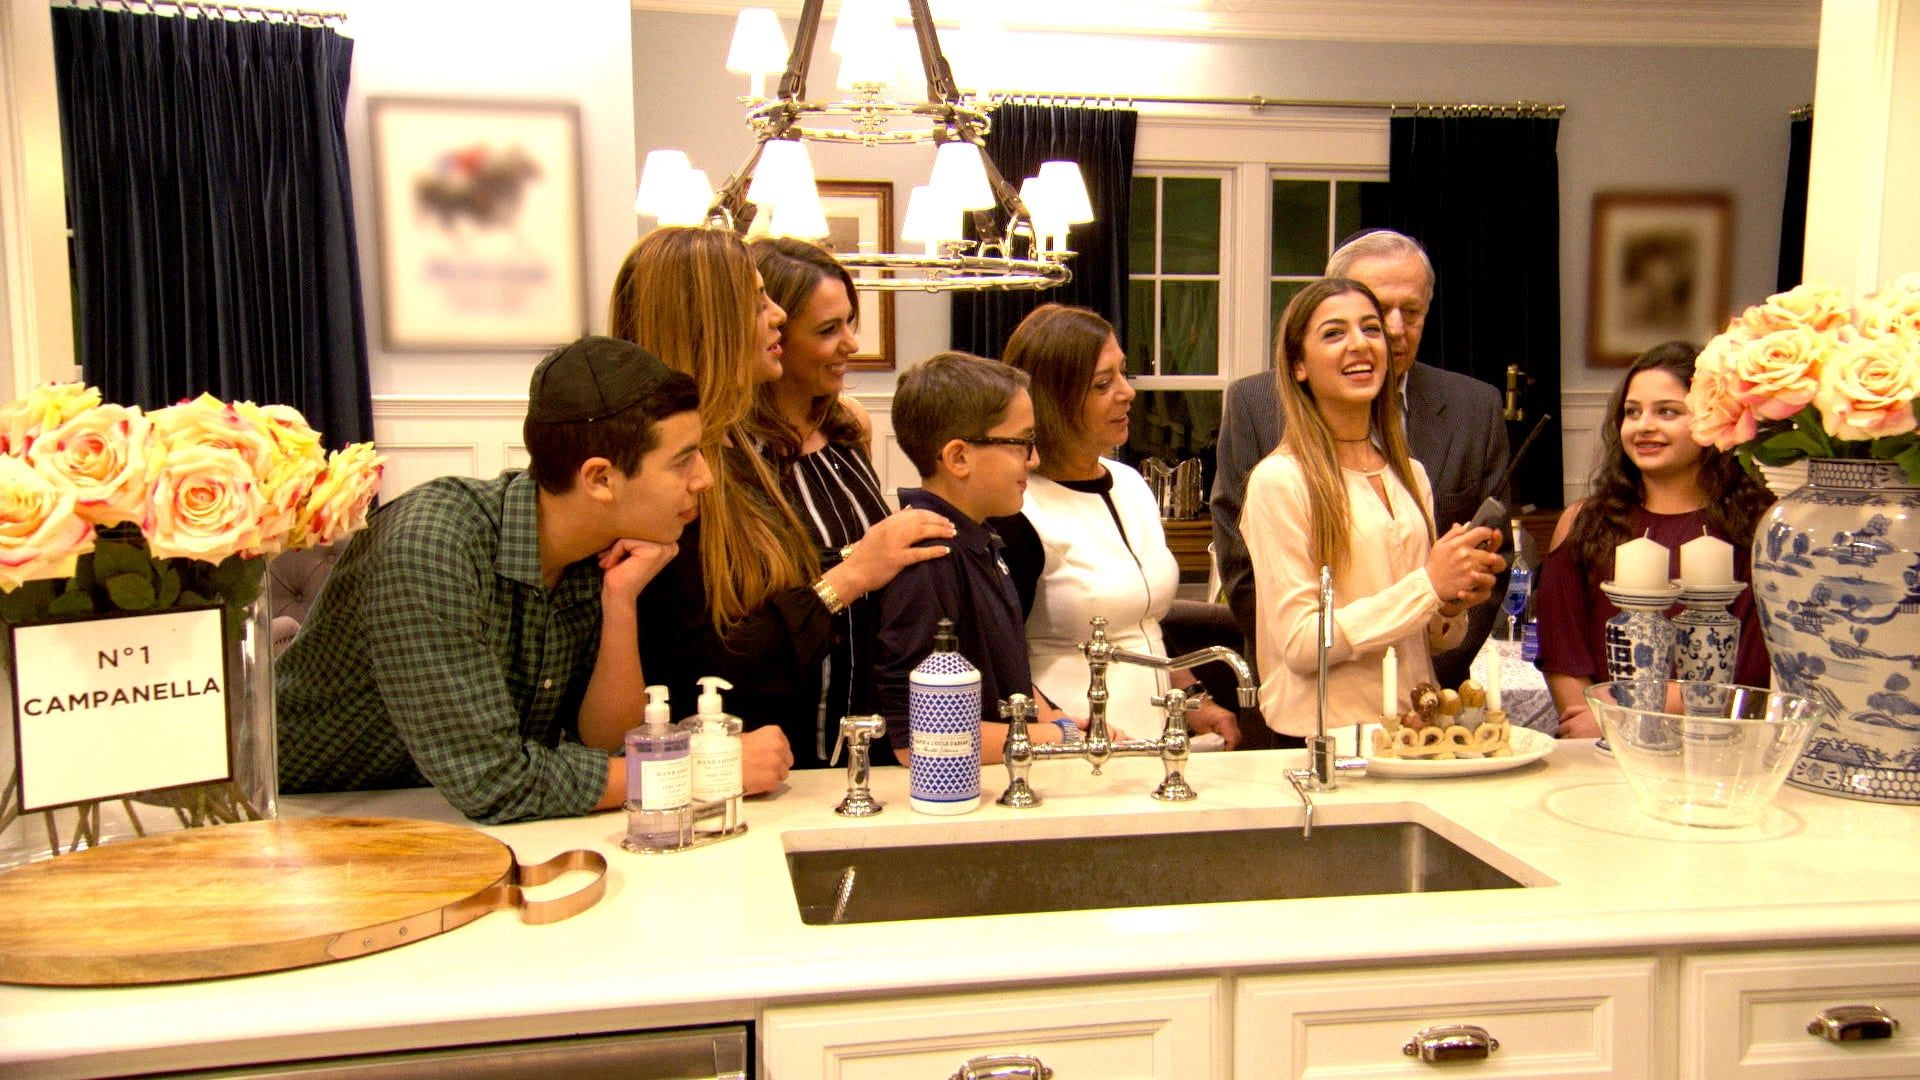 The Real Housewives of New Jersey background